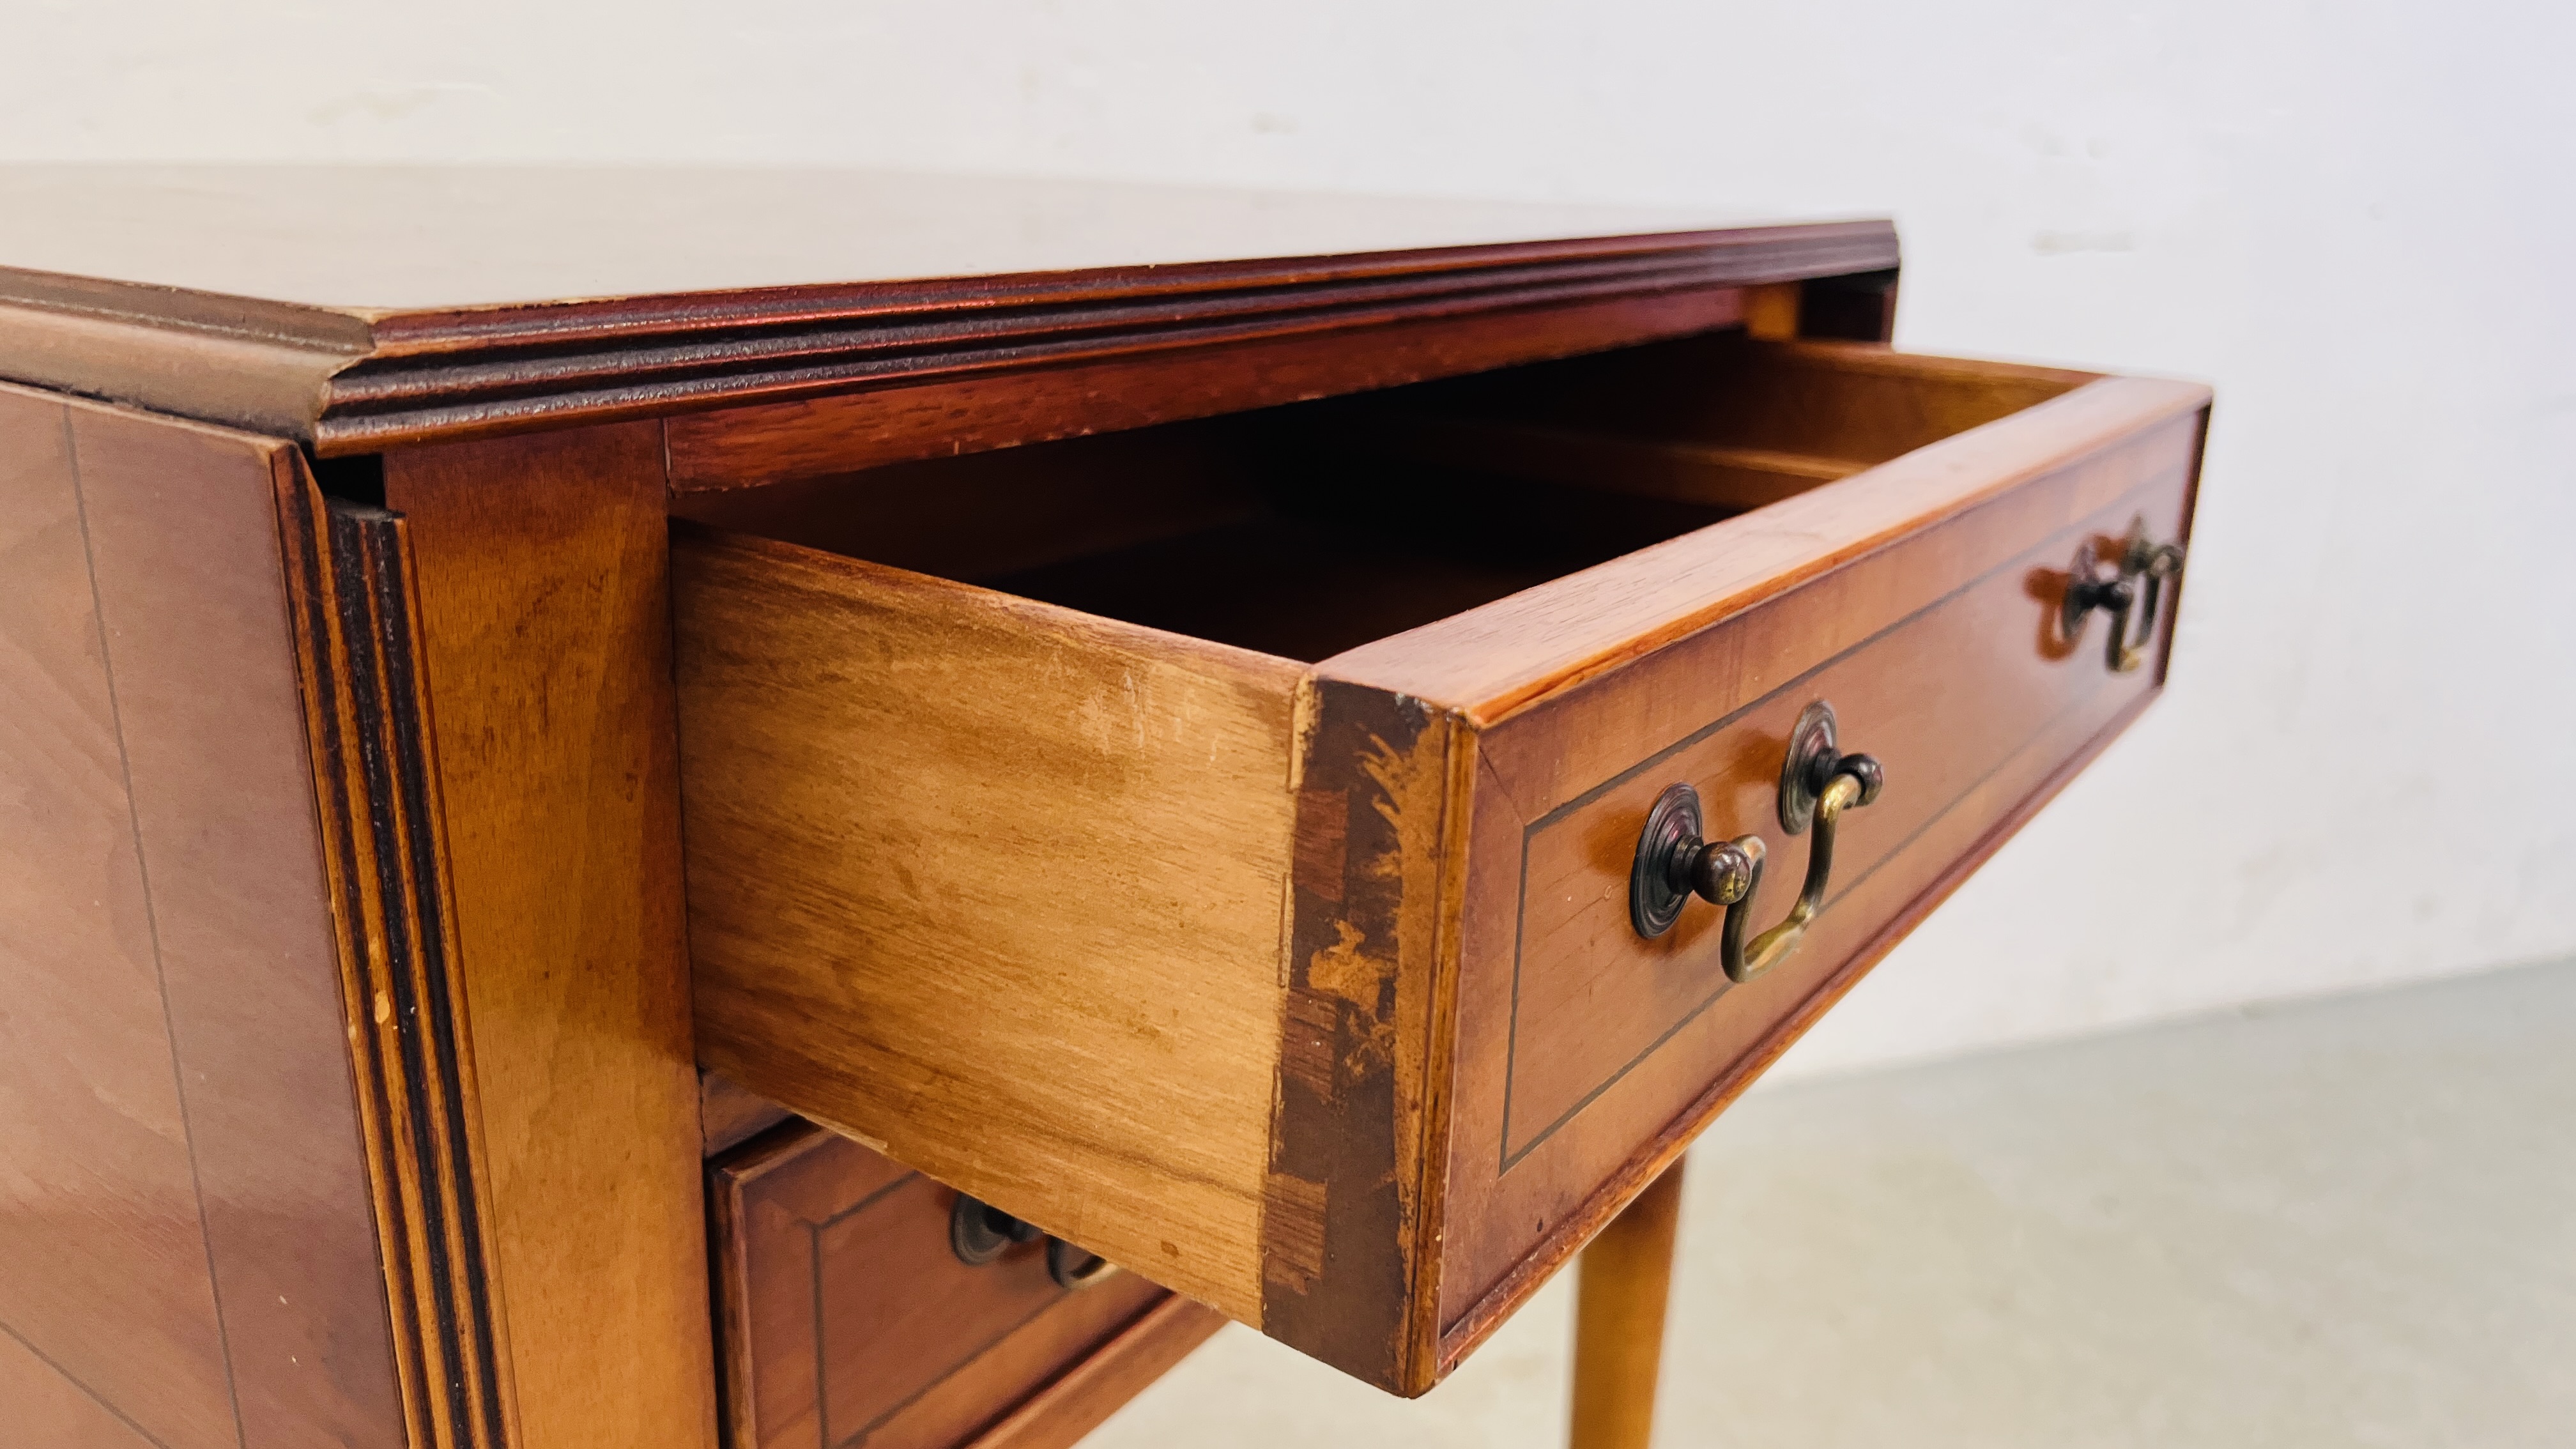 A REPRODUCTION YEW WOOD DROP LEAF OCCASIONAL TABLE WITH TWO FRIEZE DRAWERS. - Image 6 of 7